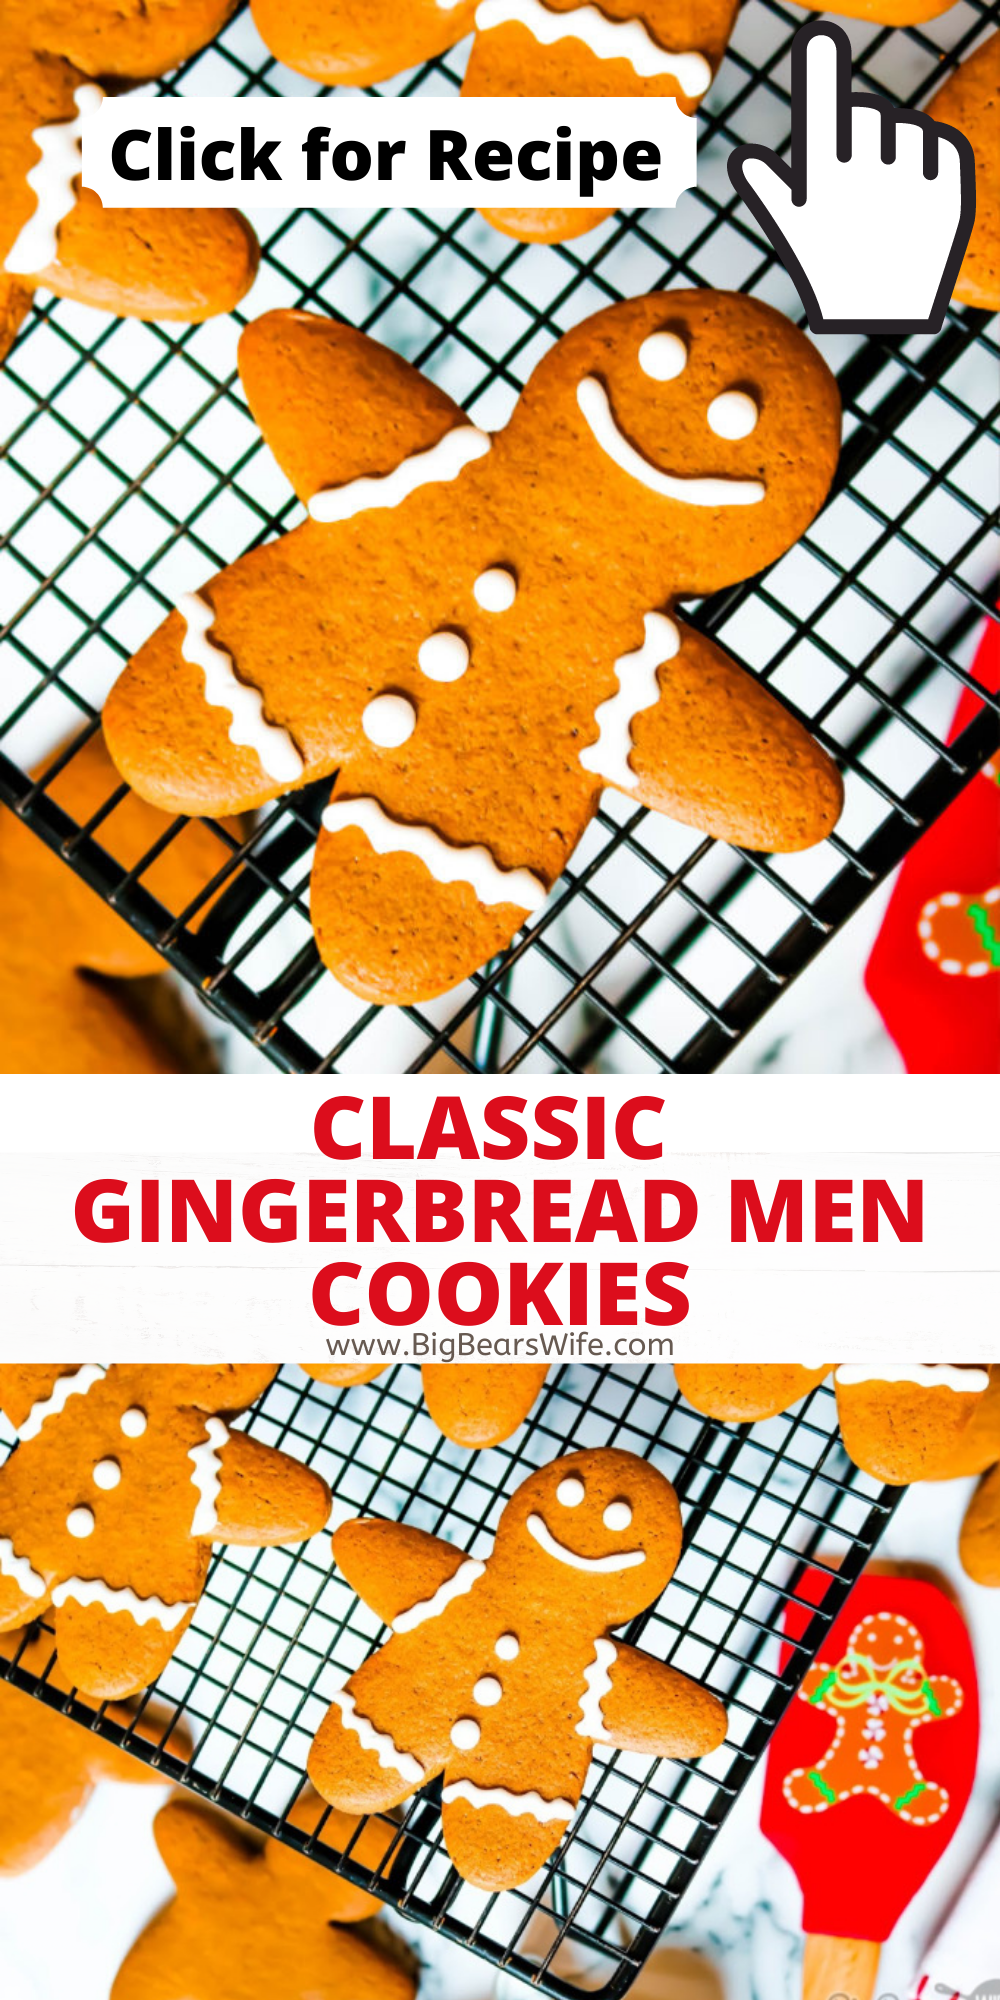 Classic Gingerbread Men Cookies are so perfect for the holidays! This gingerbread cookie dough holds up for perfectly for gingerbread cutout cookies or can be baked longer to create gingerbread men cookie ornaments for the Christmas Tree!  via @bigbearswife